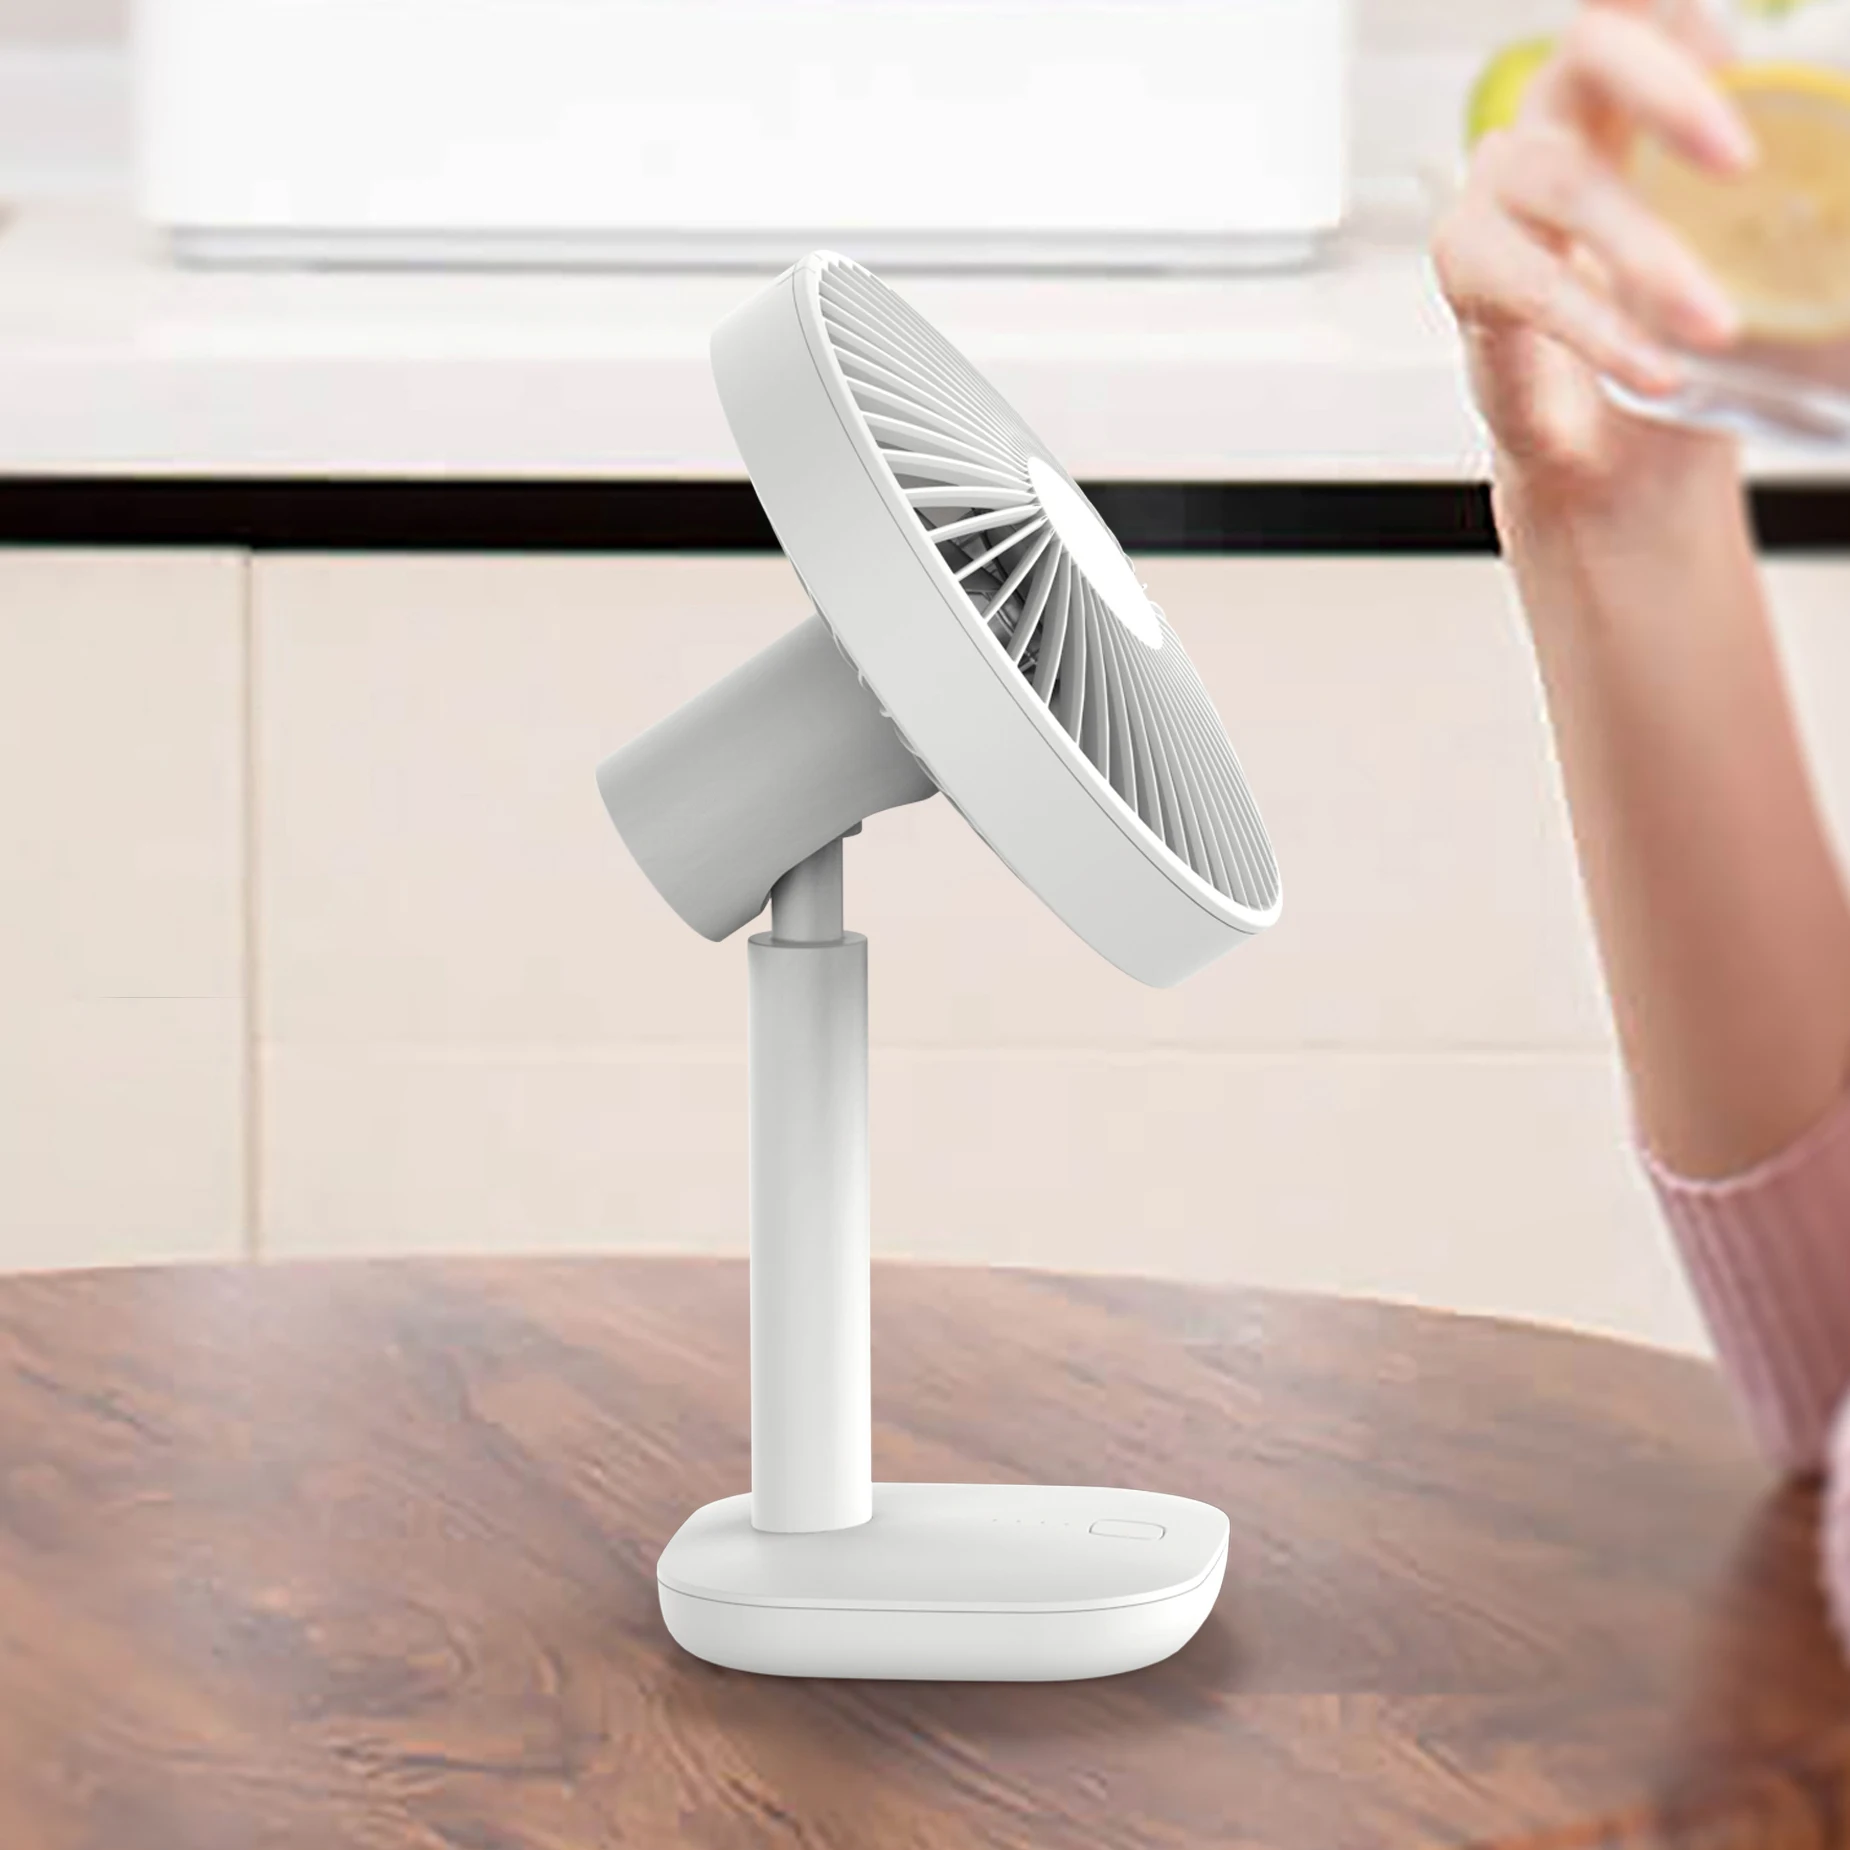 Mini Battery Operated Rechargeable USB Desk Fan, Portable Mini Desktop Cooling USB Fan with 3 Speeds Strong Wind For Home Office